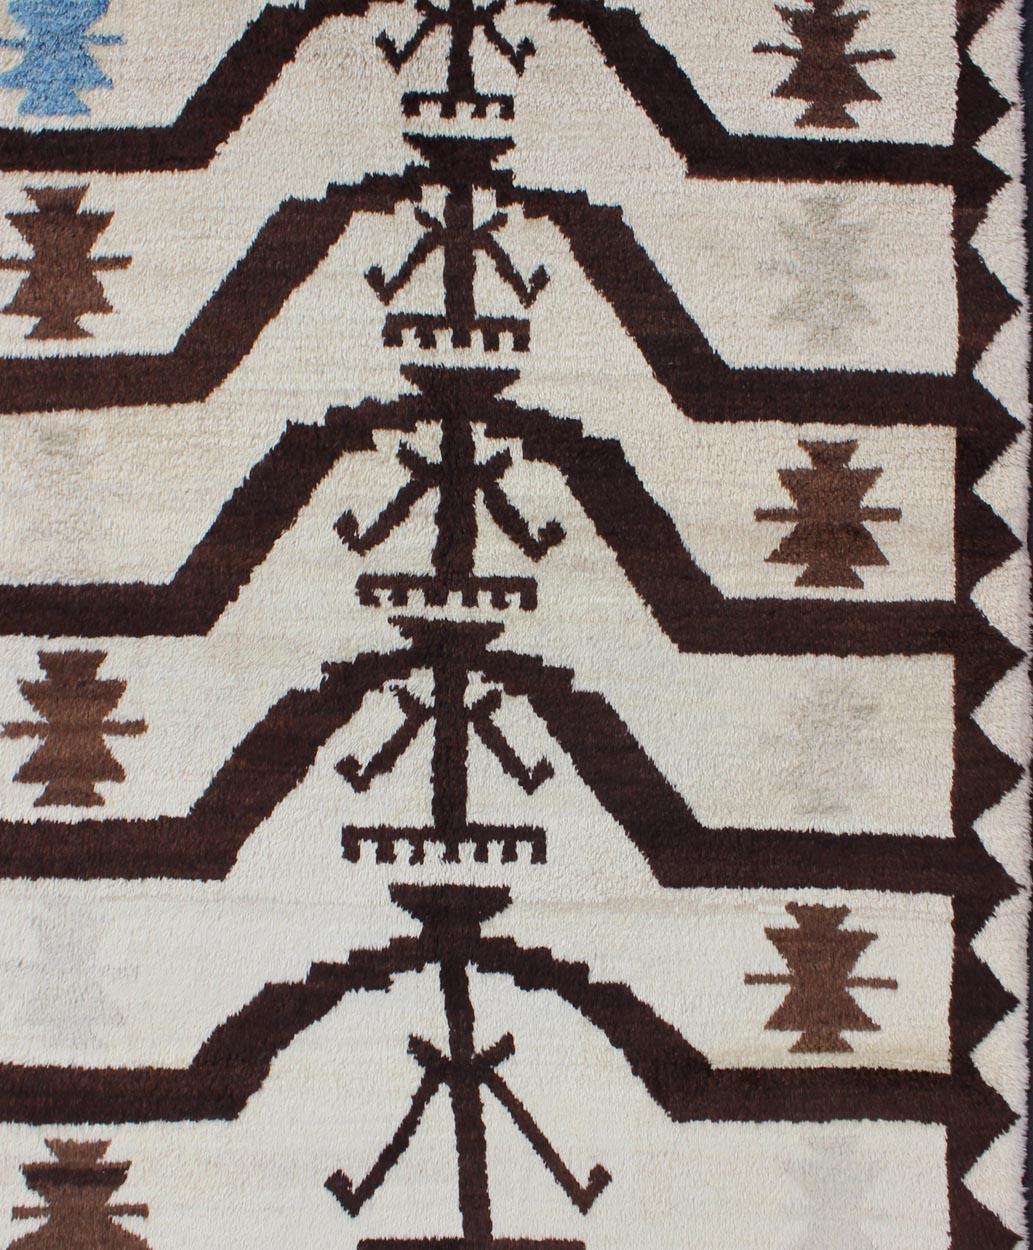 This fantastic Turkish Tulu rug features a stunning Mid-Century Modern design enclosed within a semi-checkered border. The colors included are brown, off-white and blue. The wool used in these rugs is exceptionally fine and durable, in combination